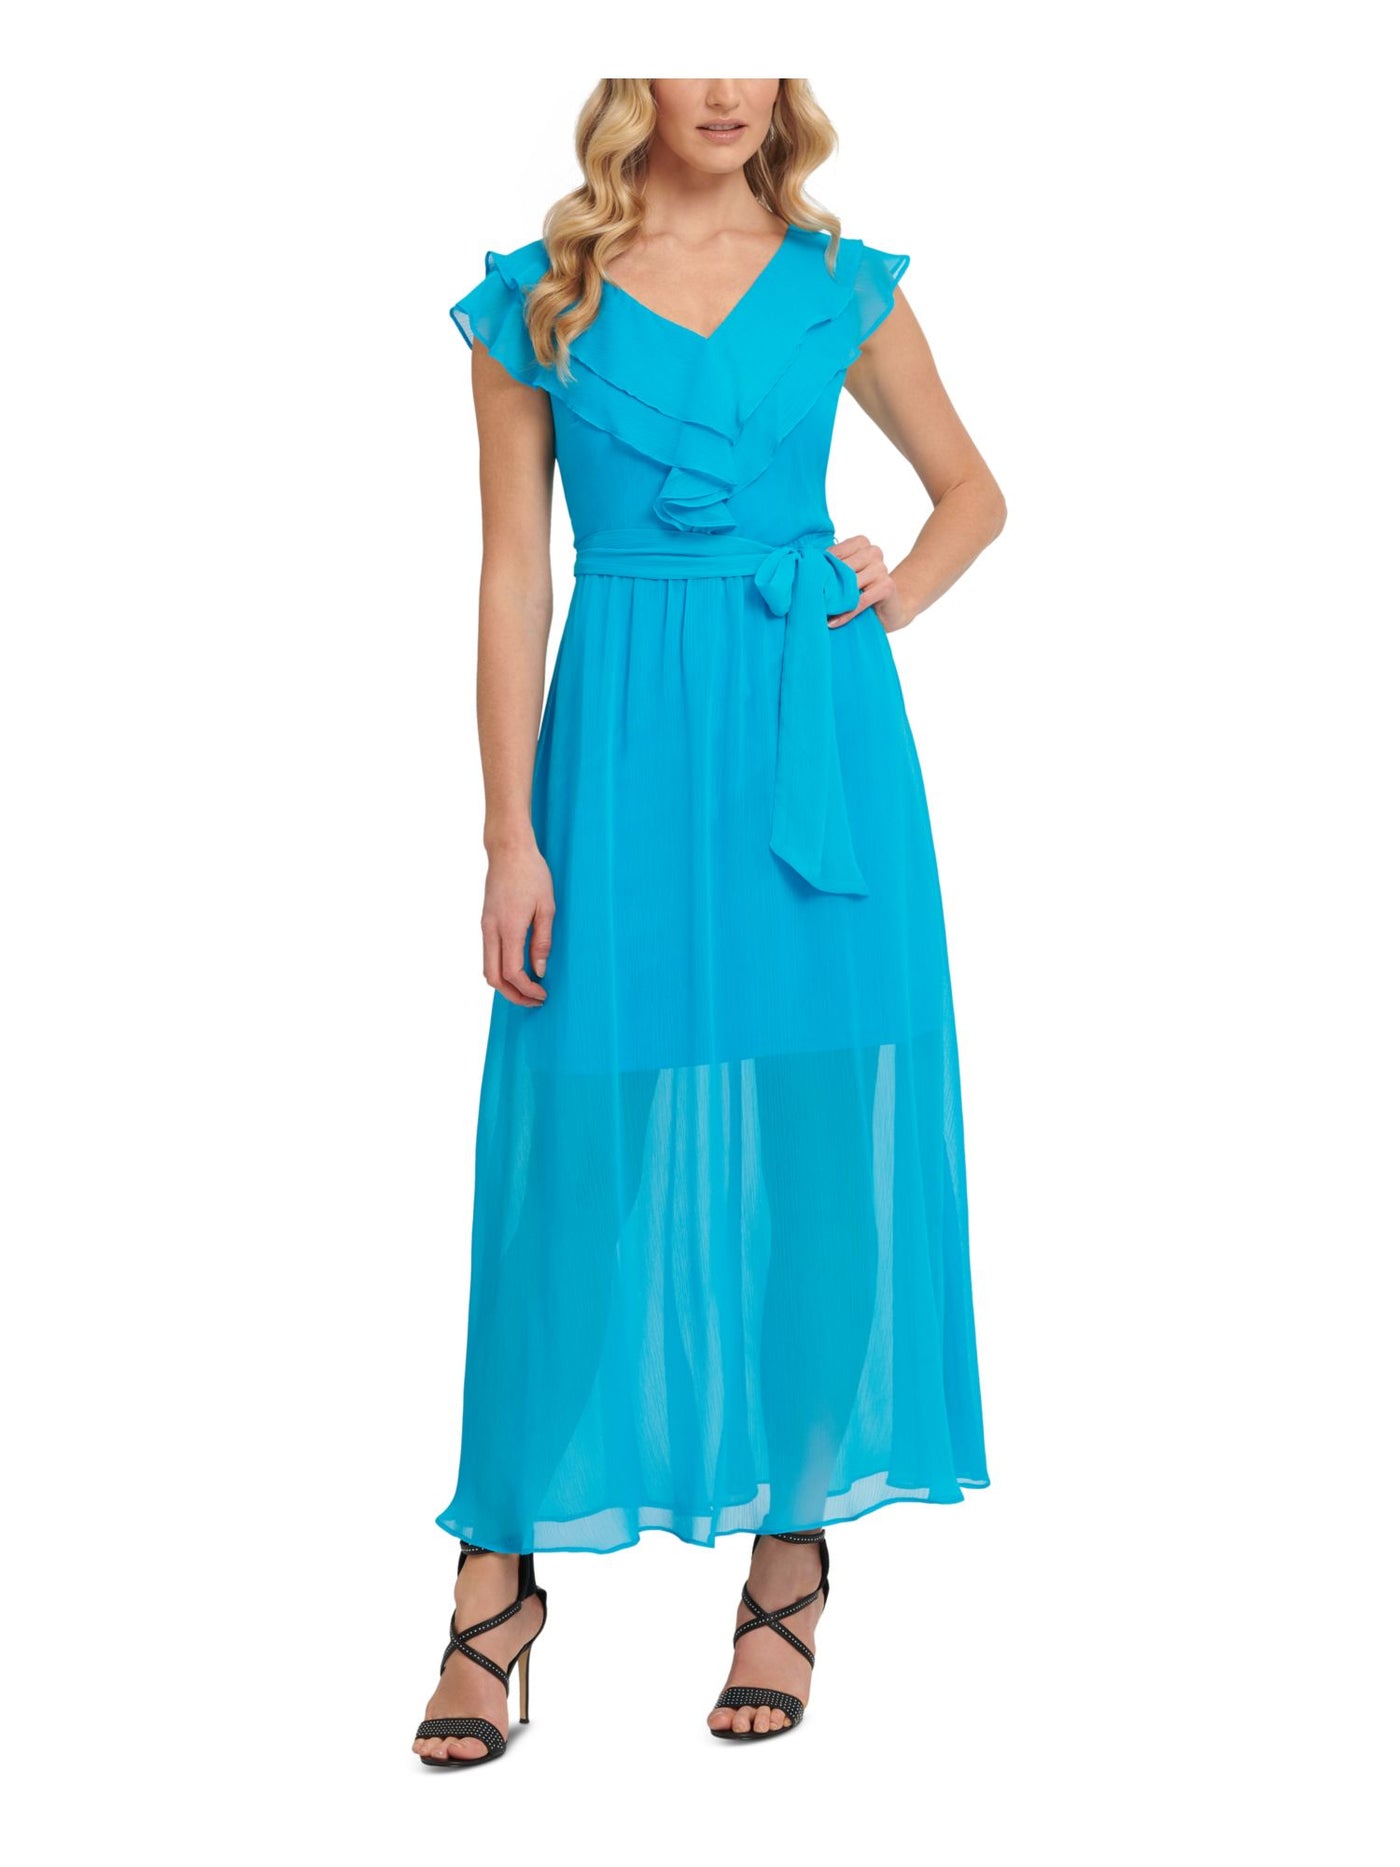 DKNY Womens Turquoise Zippered Ruffled Chiffon Tie-belt Flutter Sleeve V Neck Maxi Cocktail Fit + Flare Dress 6